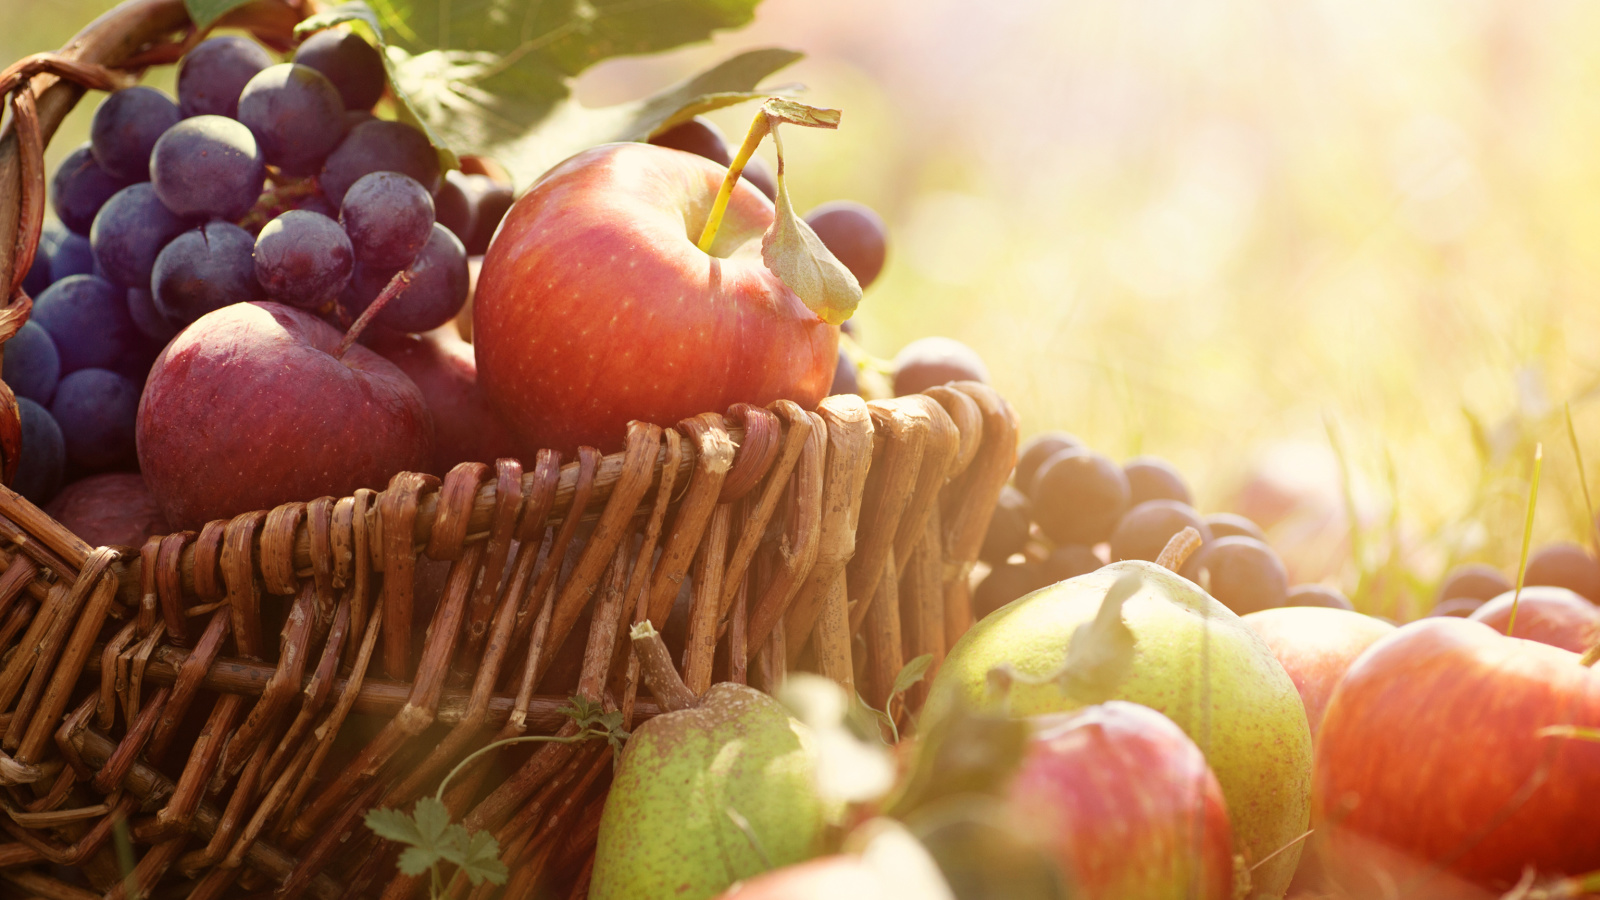 Apples and Grapes wallpaper 1600x900